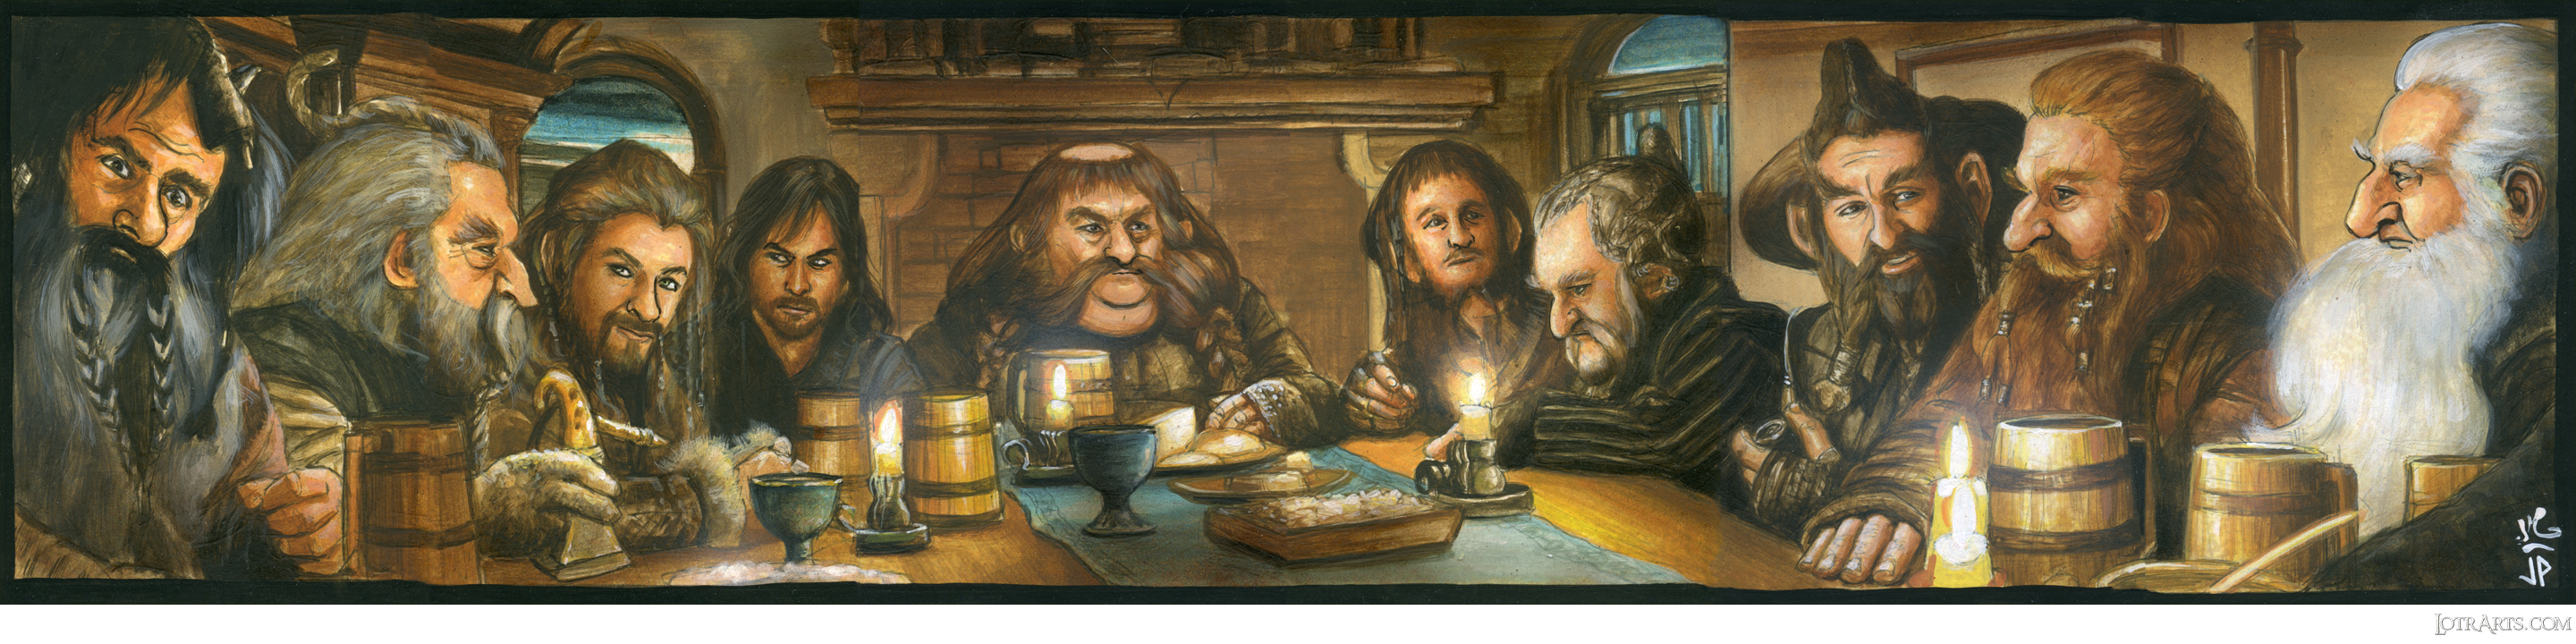 The dwarves meet at Bag End (Part1) by Potratz and Hai, five-card panel (sequenced with three-card panel)<span class="ngViews">9 views</span>